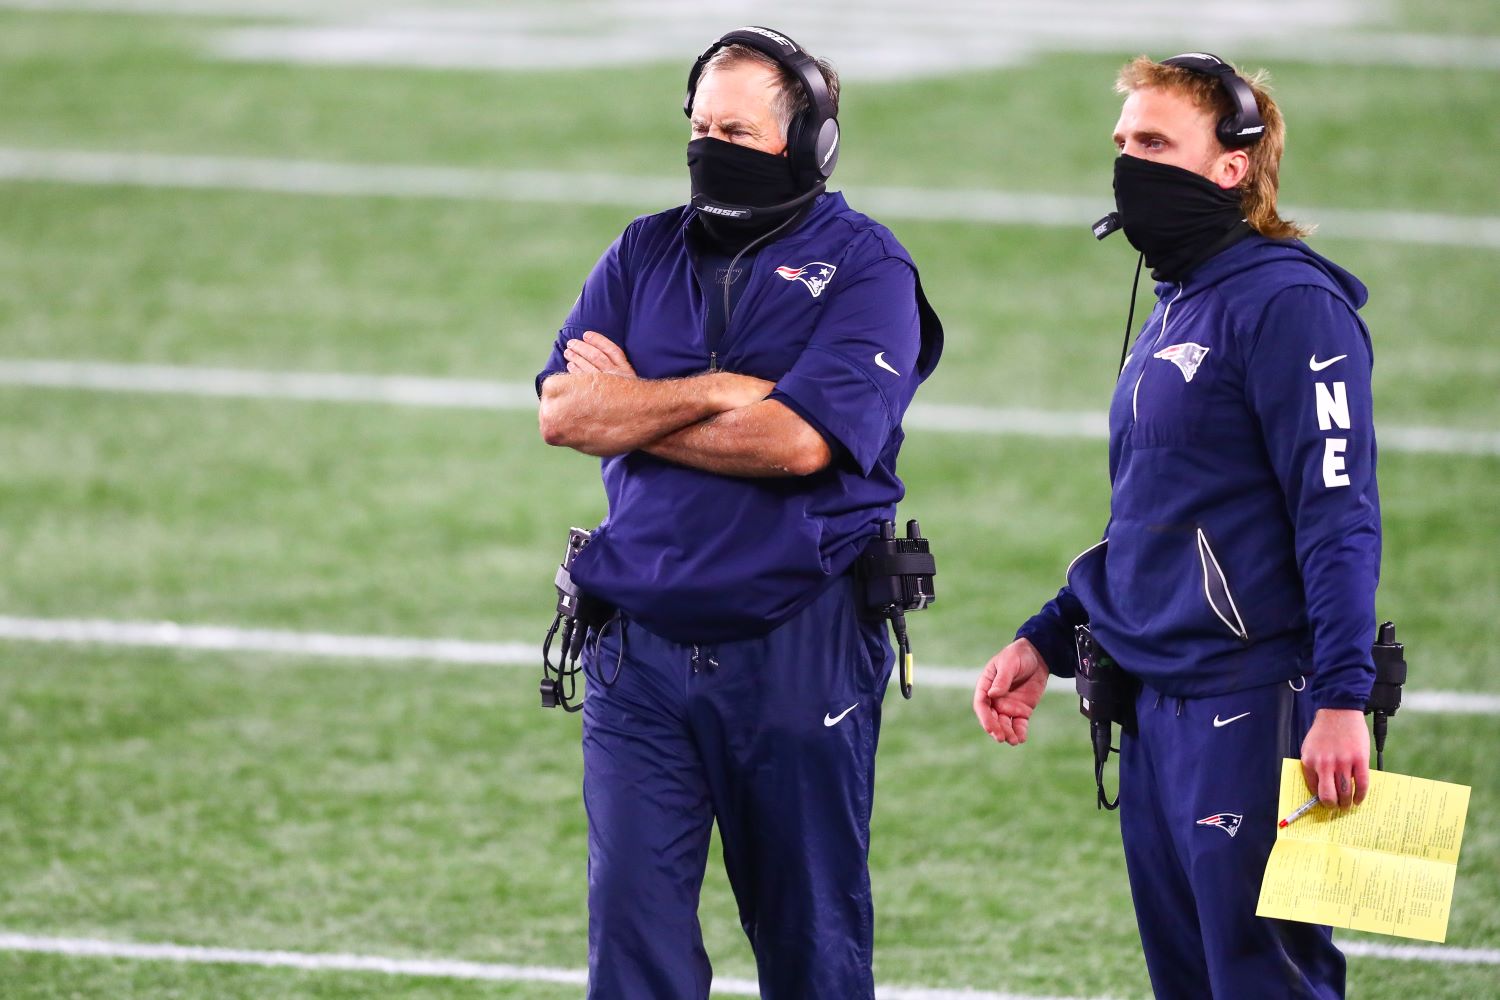 Bill Belichick finally admitted what Patriots fans have suspected all along: His son calls plays on defense.